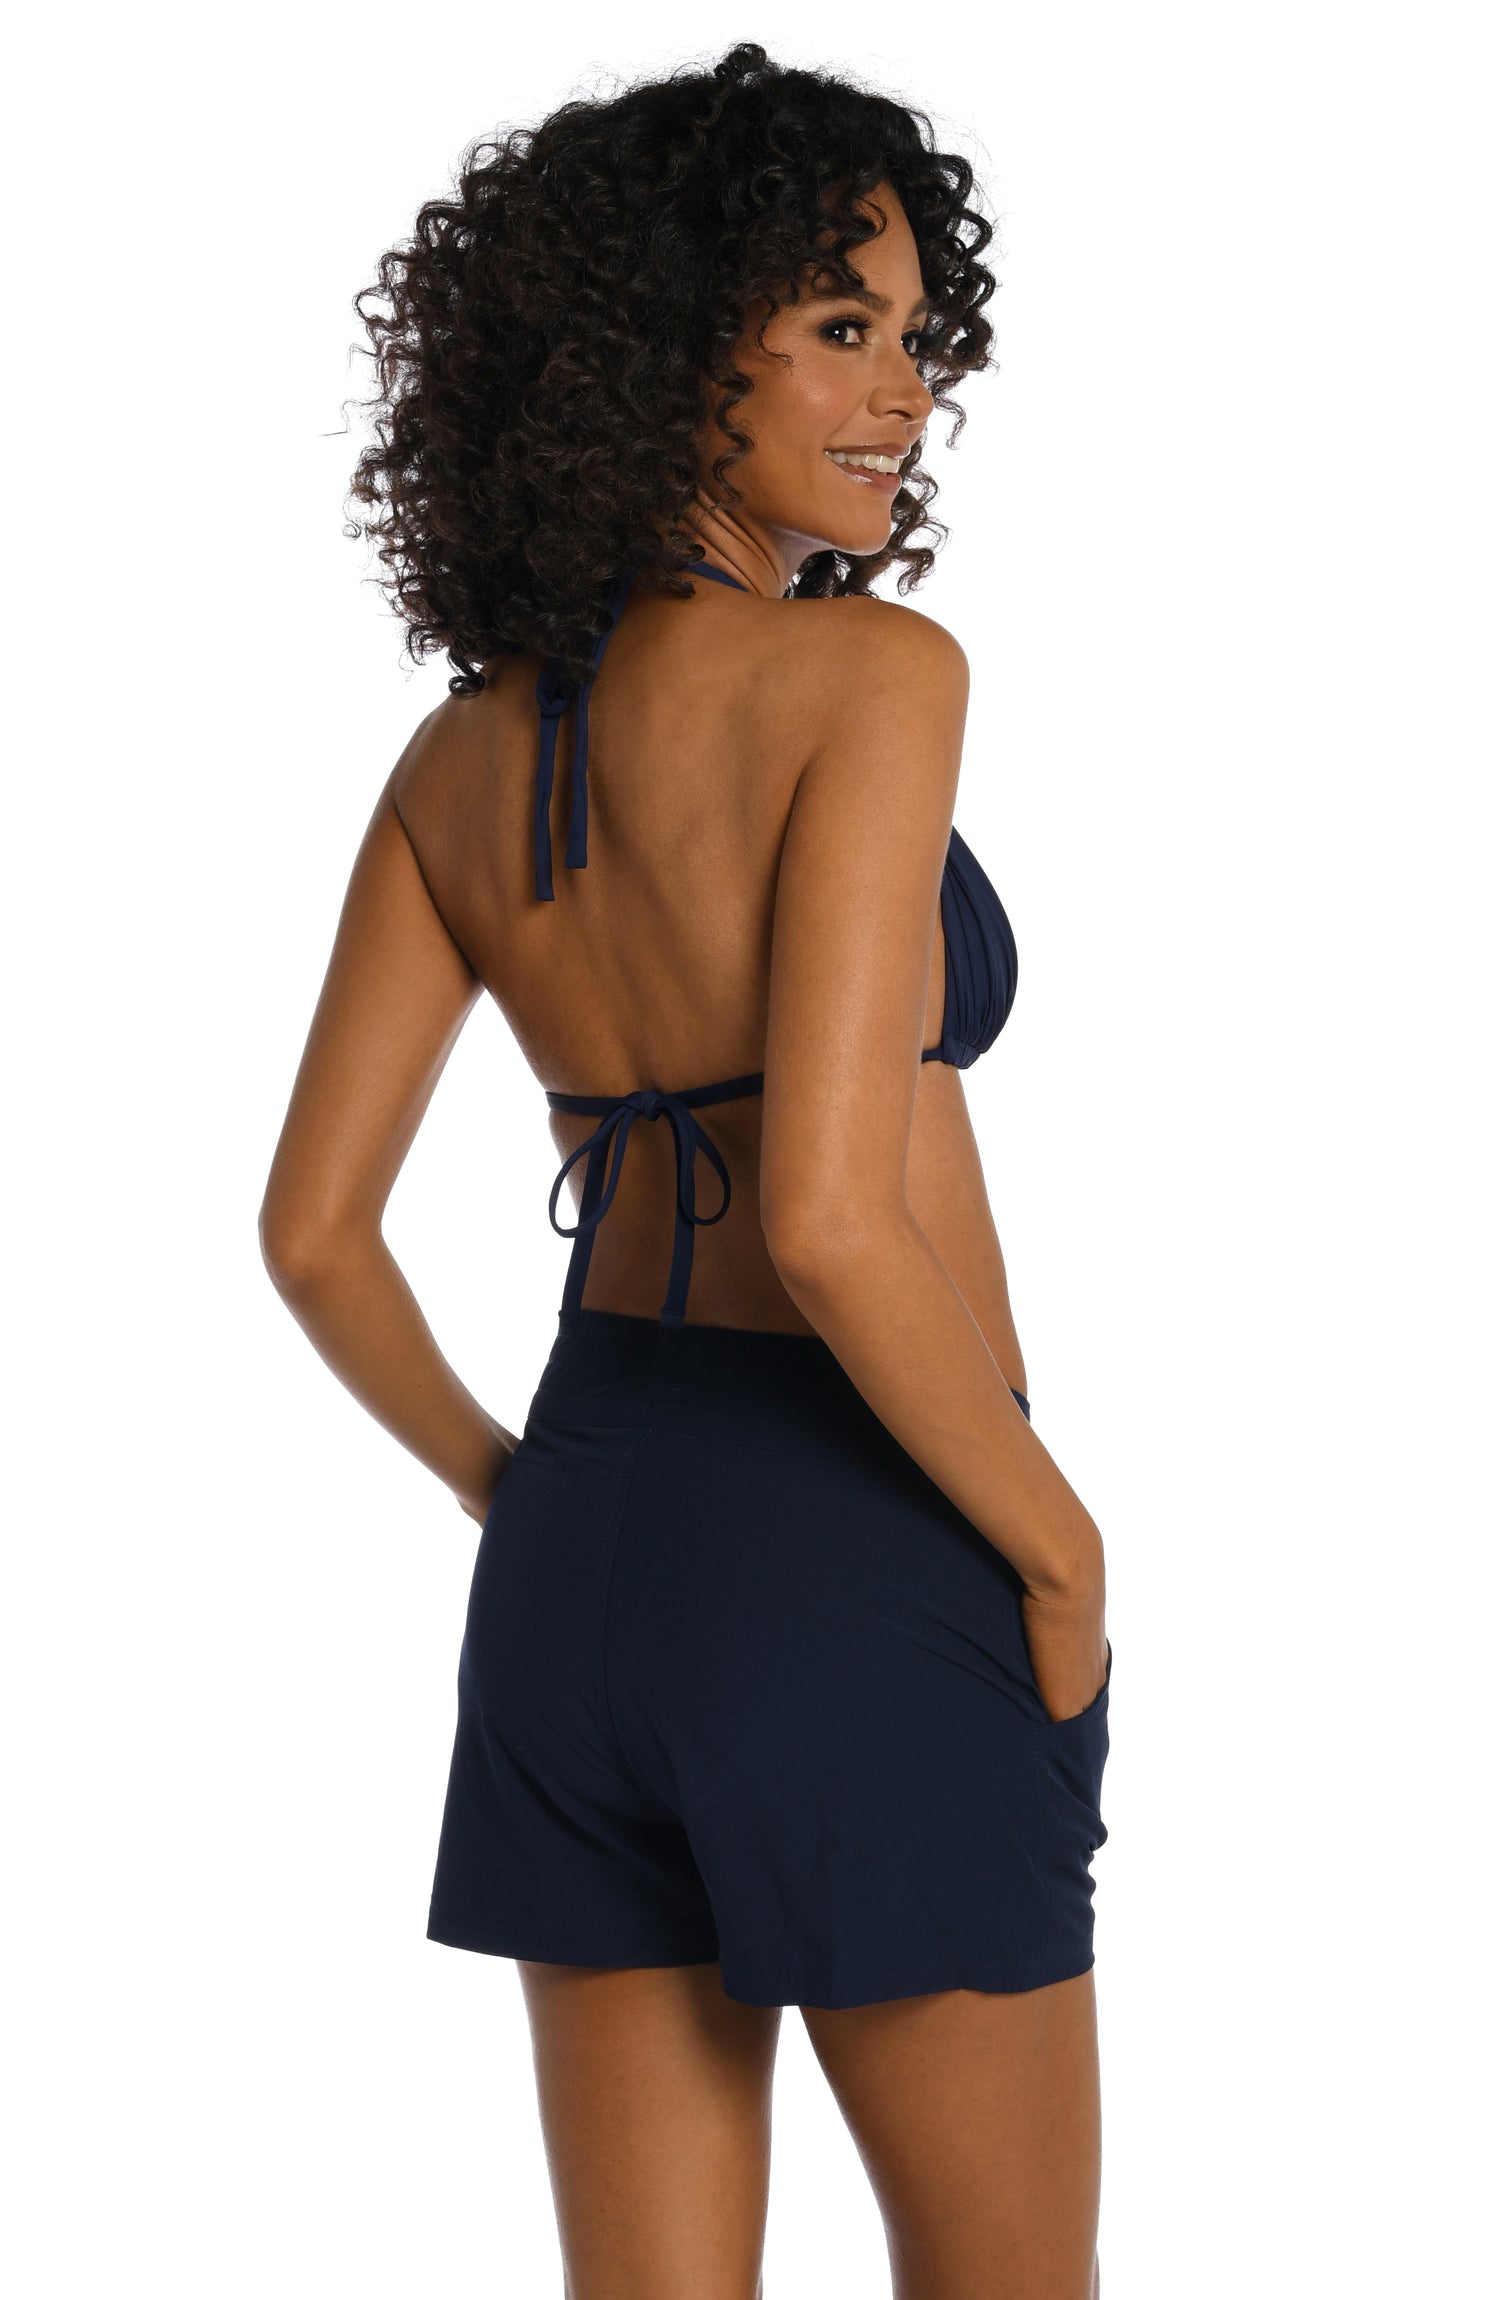 Model is wearing a indigo colored board short swimsuit from our All Aboard collection.